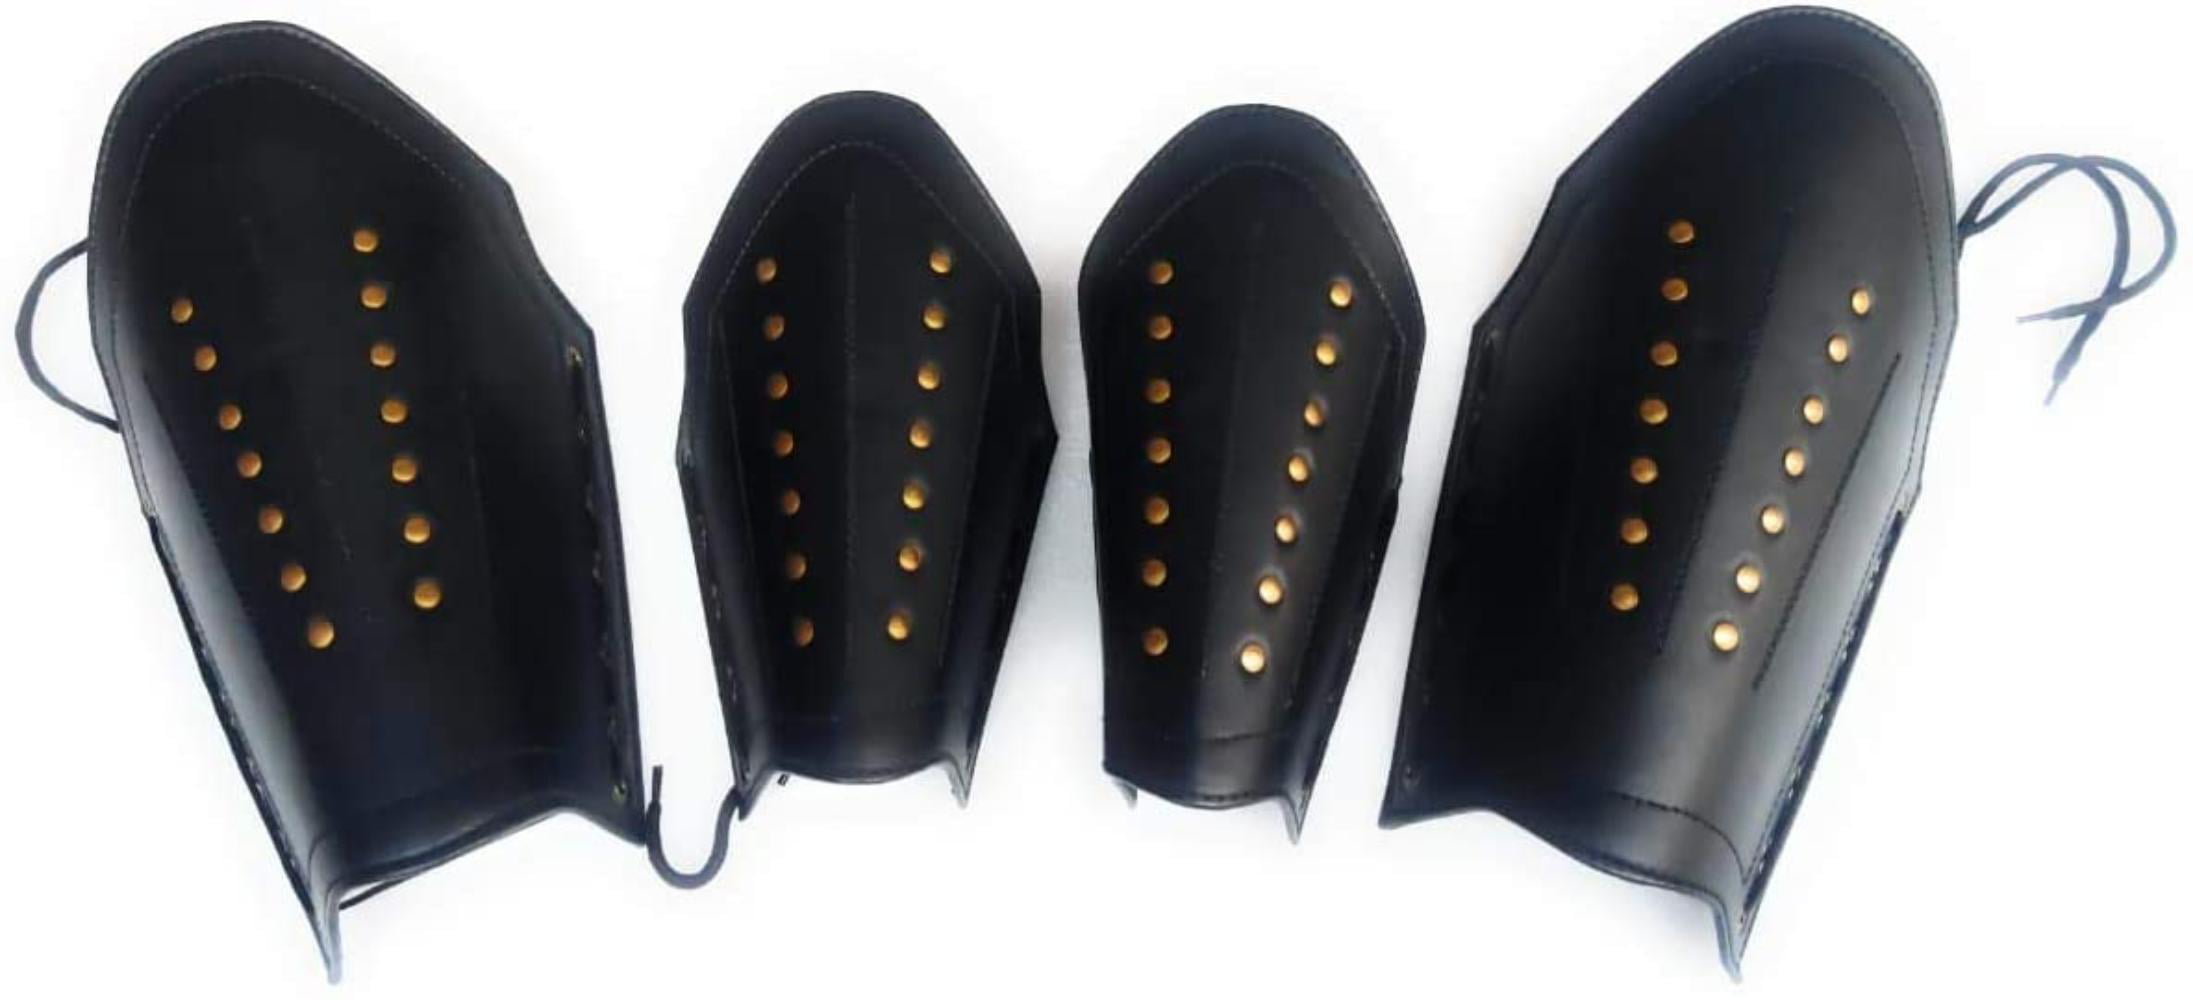 Arm Guards One Size with device Brass THORINSTRUMENTS Black Leather Swordsman Vambraces 